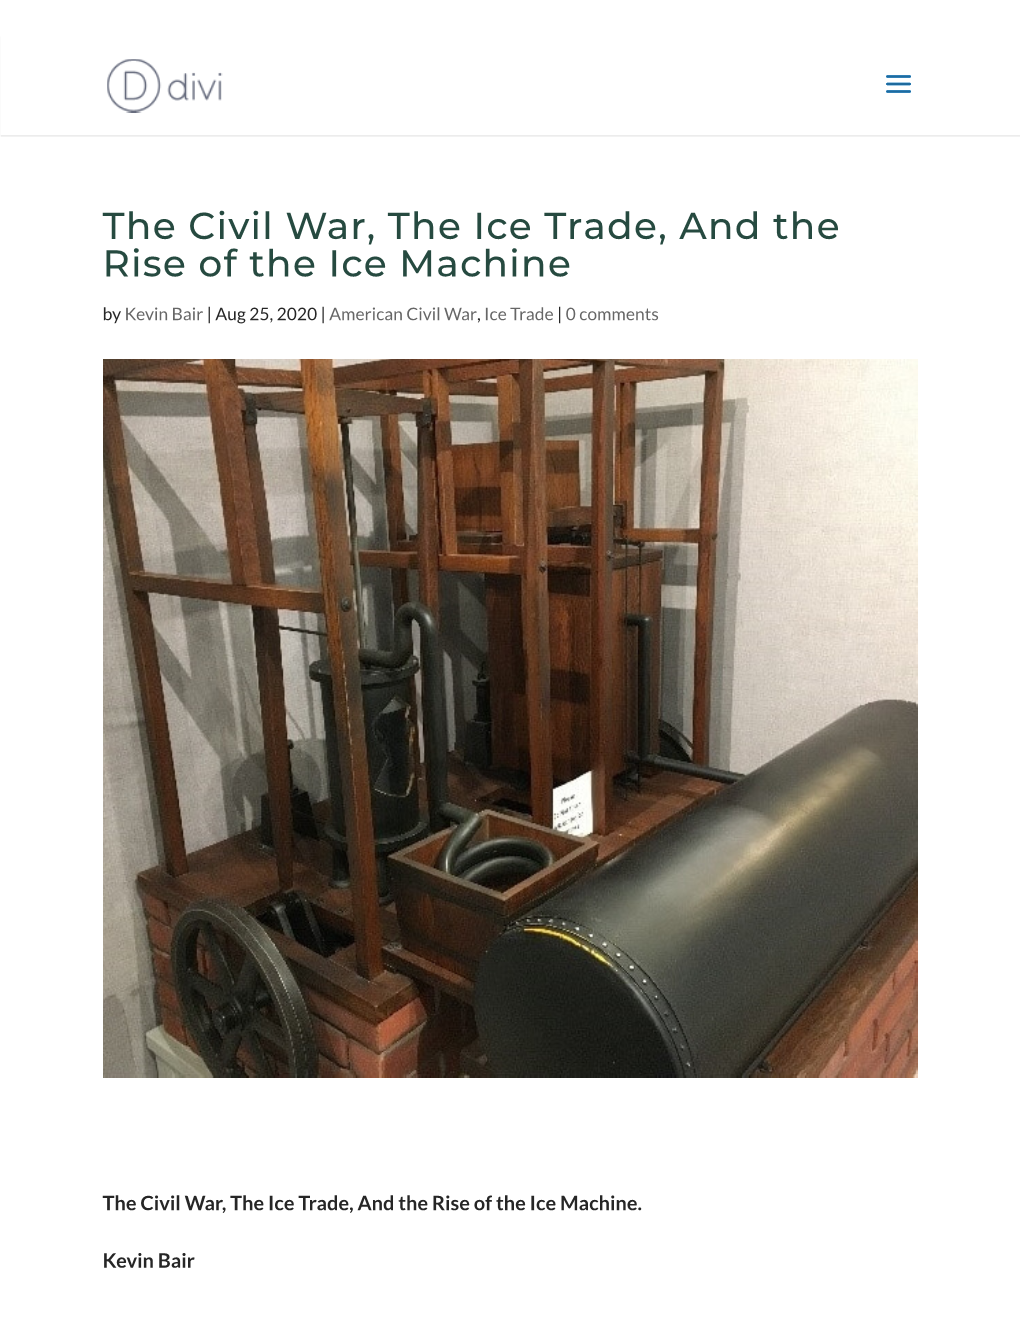 The Civil War, the Ice Trade, and the Rise of the Ice Machine by Kevin Bair | Aug 25, 2020 | American Civil War, Ice Trade | 0 Comments